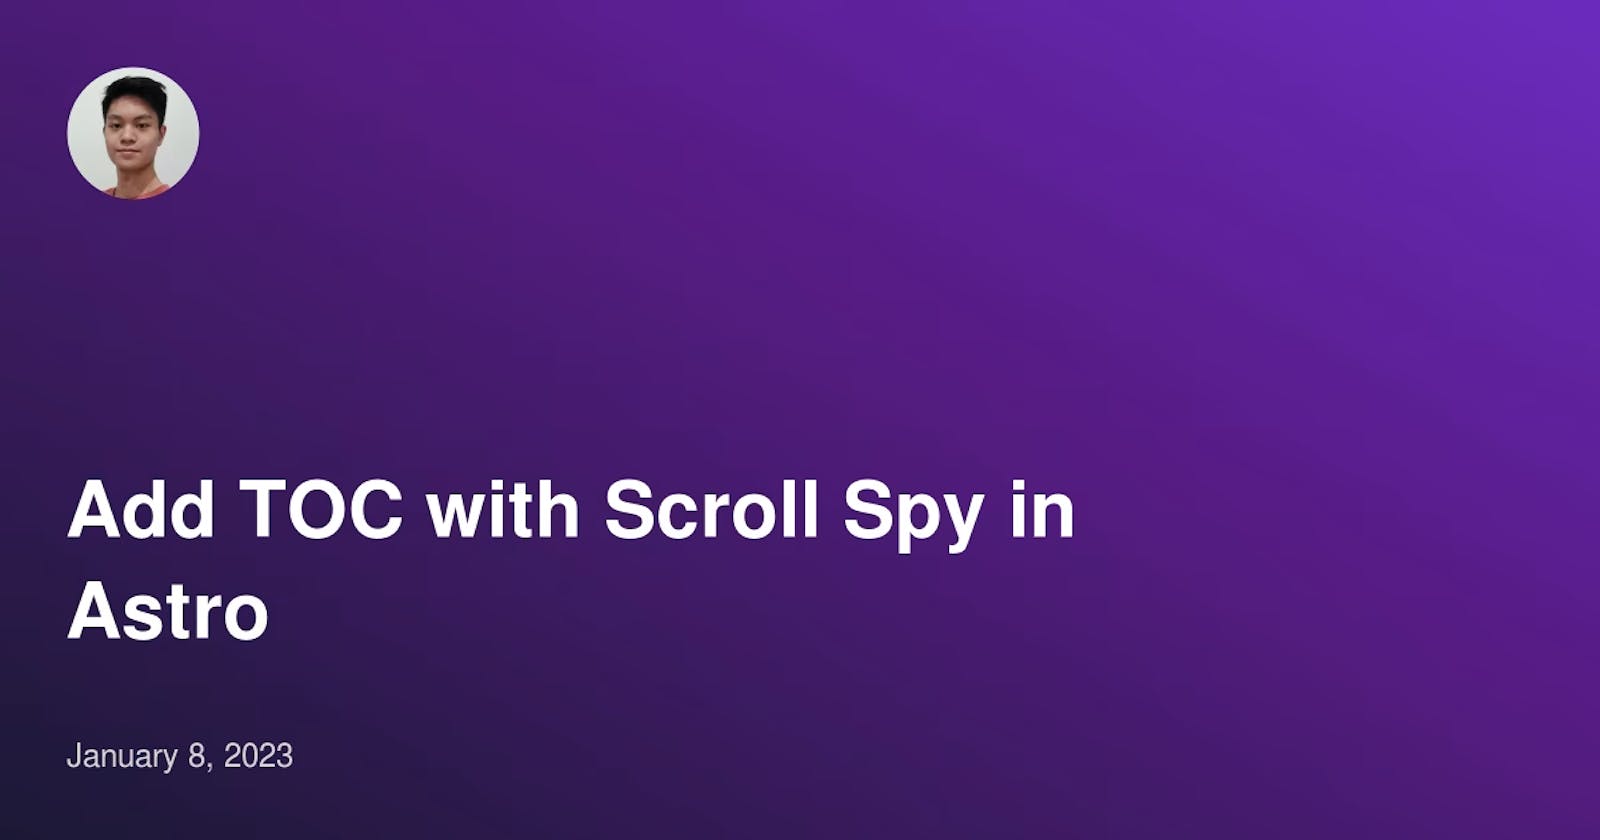 Add TOC with Scroll Spy in Astro